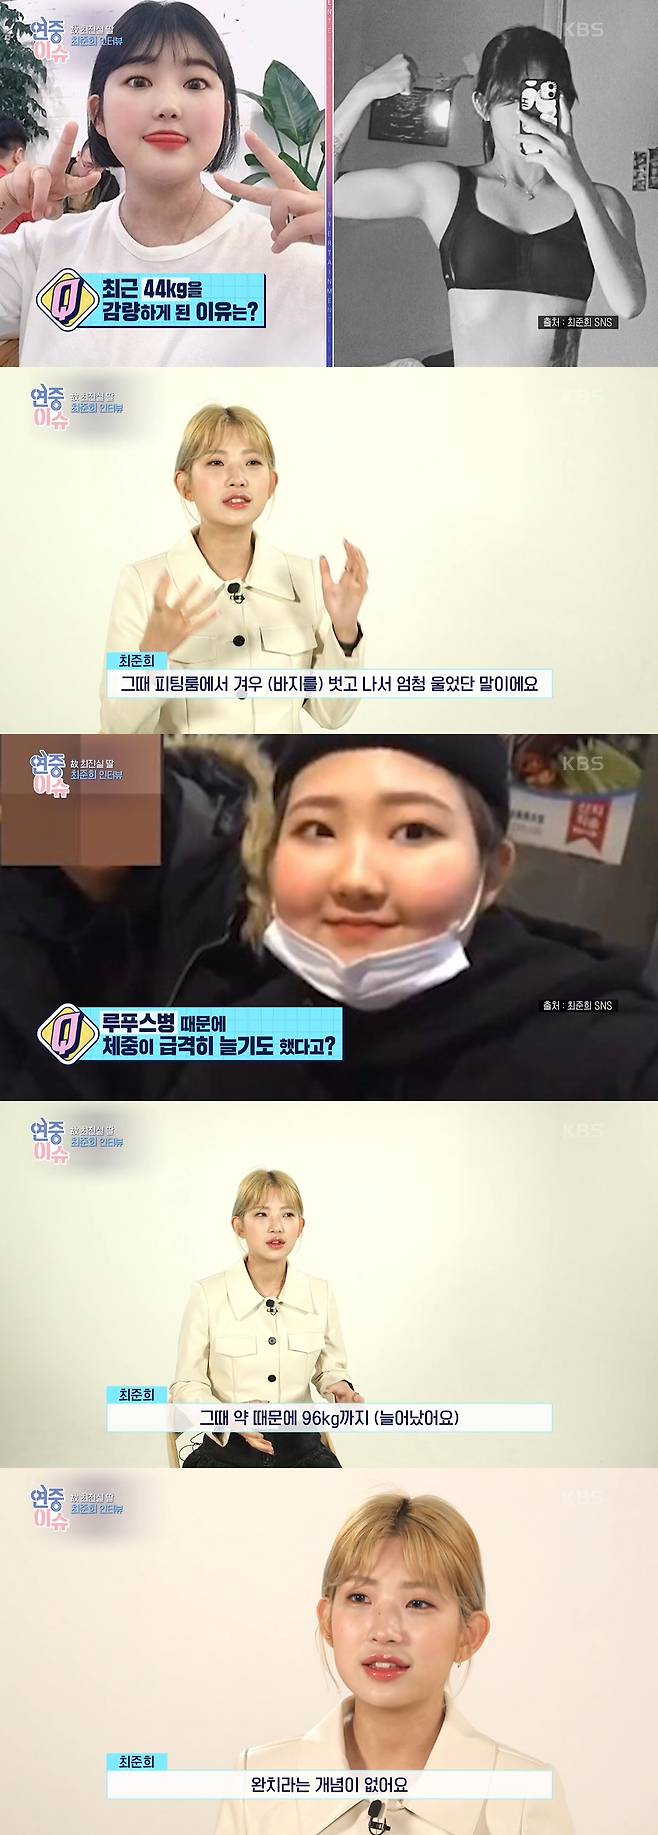 Actor late Choi Jin-sils daughter Choi Joon-Hee has revealed that lupus disease has not been cured.Choi Joon-Hees interview was broadcast on KBS2 Year-round live broadcast on the 11th.Choi Joon-Hee, who was born in 2003 and turned 20 this year, laughed brightly, saying, It is good that you can buy colorful drinks that you see every time you enter a convenience store as a private certificate (resident registration card).He also said that he and his brother Choi Hwan-hee (JiPlat) usually think of the broadcaster Jin-kyeong Hong as a mother, and recently Jin-kyeong Hong said, I am 20 years old and I want to cope more maturely.Choi Joon-Hee added: Precisely call me and say, Always my aunt is praying for Junhee.Choi Joon-Hee has gained weight to 96kg due to a battle with lupus disease, but lost 44kg and collected a big topic.I went to the fitting room and put on my pants, but I did not raise my pants so that I could get red, but I did not wear it anyway.I just took off and cried a lot. I got lupus disease in my middle school, but there is no concept of cure, and I am still taking medicine, and I have increased my weight because of it.I ate a lot because of the side effects of the medicine, he added.Choi Joon-Hee said, I want to follow my mothers picture. Choi Jin-sils photo was released. I take pictures of this style a little often.I have to shoot it, so I have to raise my eyes.  I do not have a youthful mother. I have to sweep my temples. Choi Joon-Hee said, I am not sure yet that you think you will be following your mother.I want to try the cafe, and I am interested in dog beauty and makeup. I still want to do so, so I feel sorry to have to choose one job. Choi Joon-Hee also said, I did not live a long life, but I think I have been through a lot of work in the movie for 20 years, so I am preparing a prose book containing what I learned and what I felt at my point of view.Sometimes it is said that every move is a burden. Sometimes ordinary friends are envious. (SNS) I look exaggerated if I raise one.It was a little bit tough in my school days, she said.Finally, Choi Joon-Hee said, It is not an exaggeration to say that my mother gave birth and the public raised it.I look forward to my mothers share and look at her with a lot of love, and my brother and I plan to live hard enough to think that my mother and uncle are cool when they see them in the sky. 